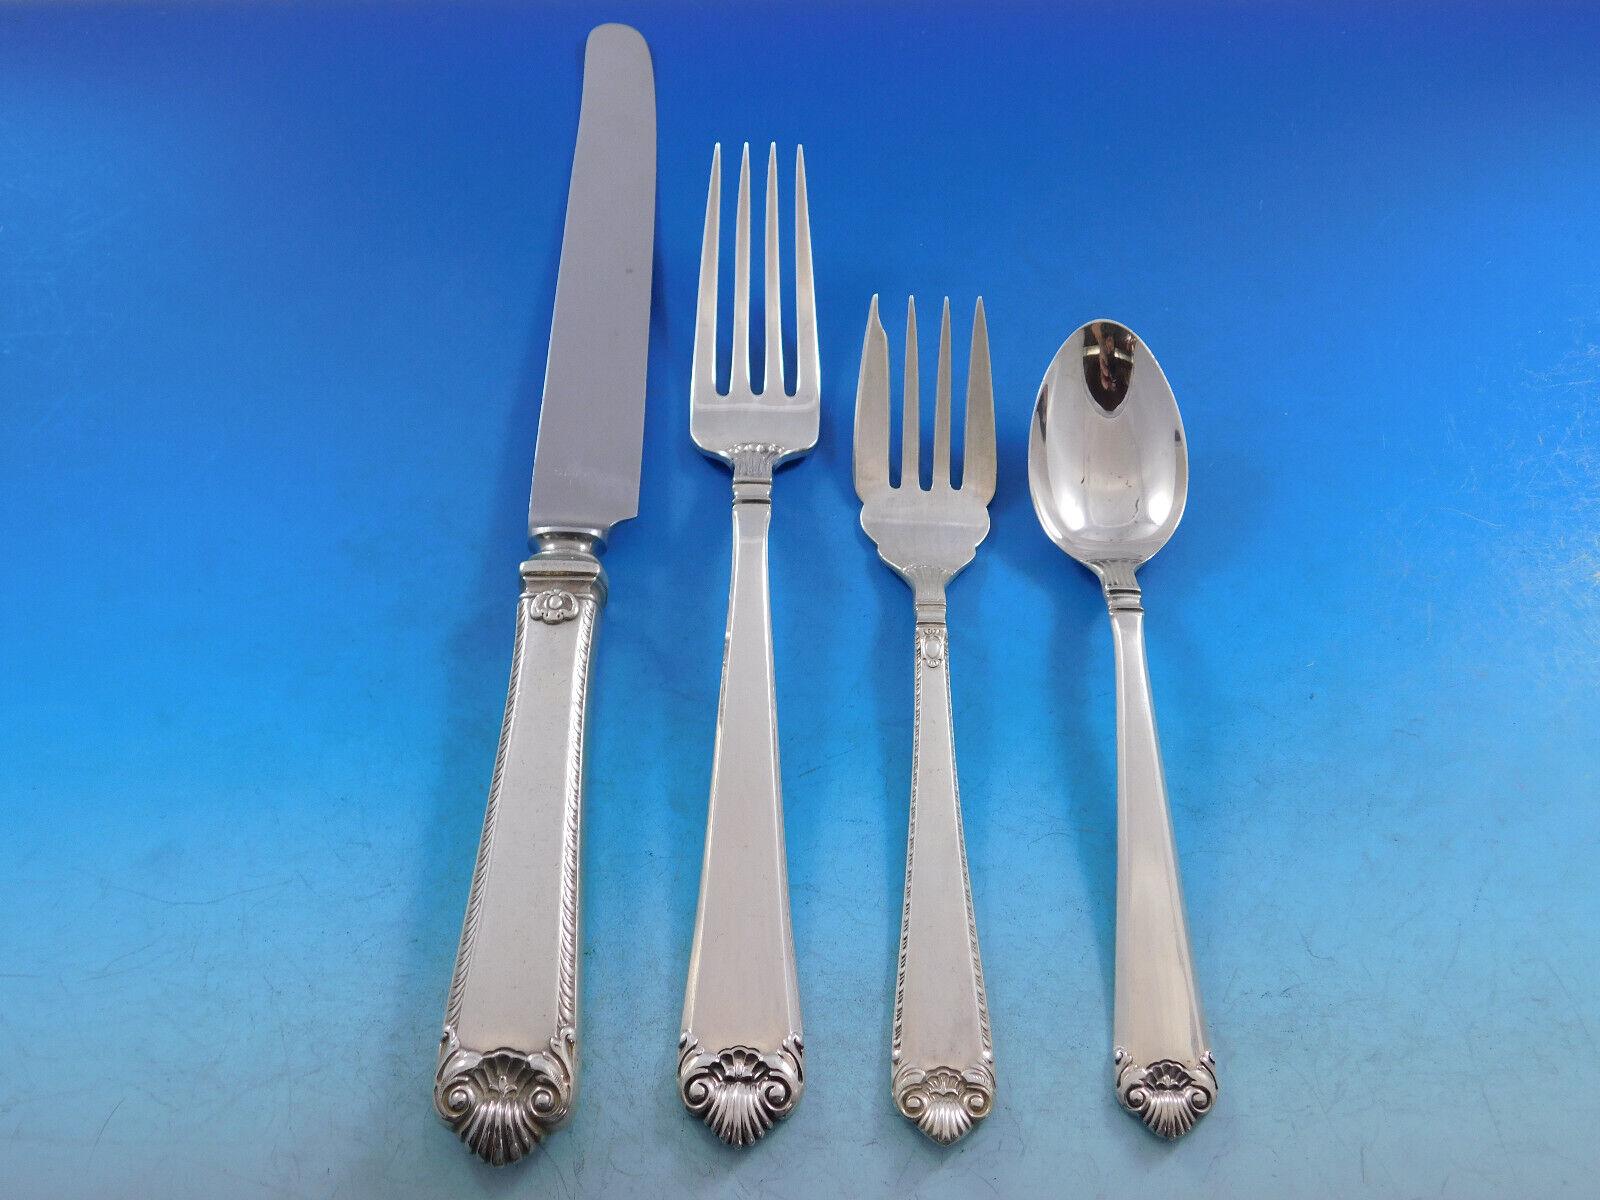 GEORGE II REX HAND CHASED BY WATSON sterling silver Dinner & Luncheon Flatware service, 81 pieces. This pattern is wonderfully heavy! This set includes:

6 Dinner Size Knives w/ French stainless blades, 10 1/8